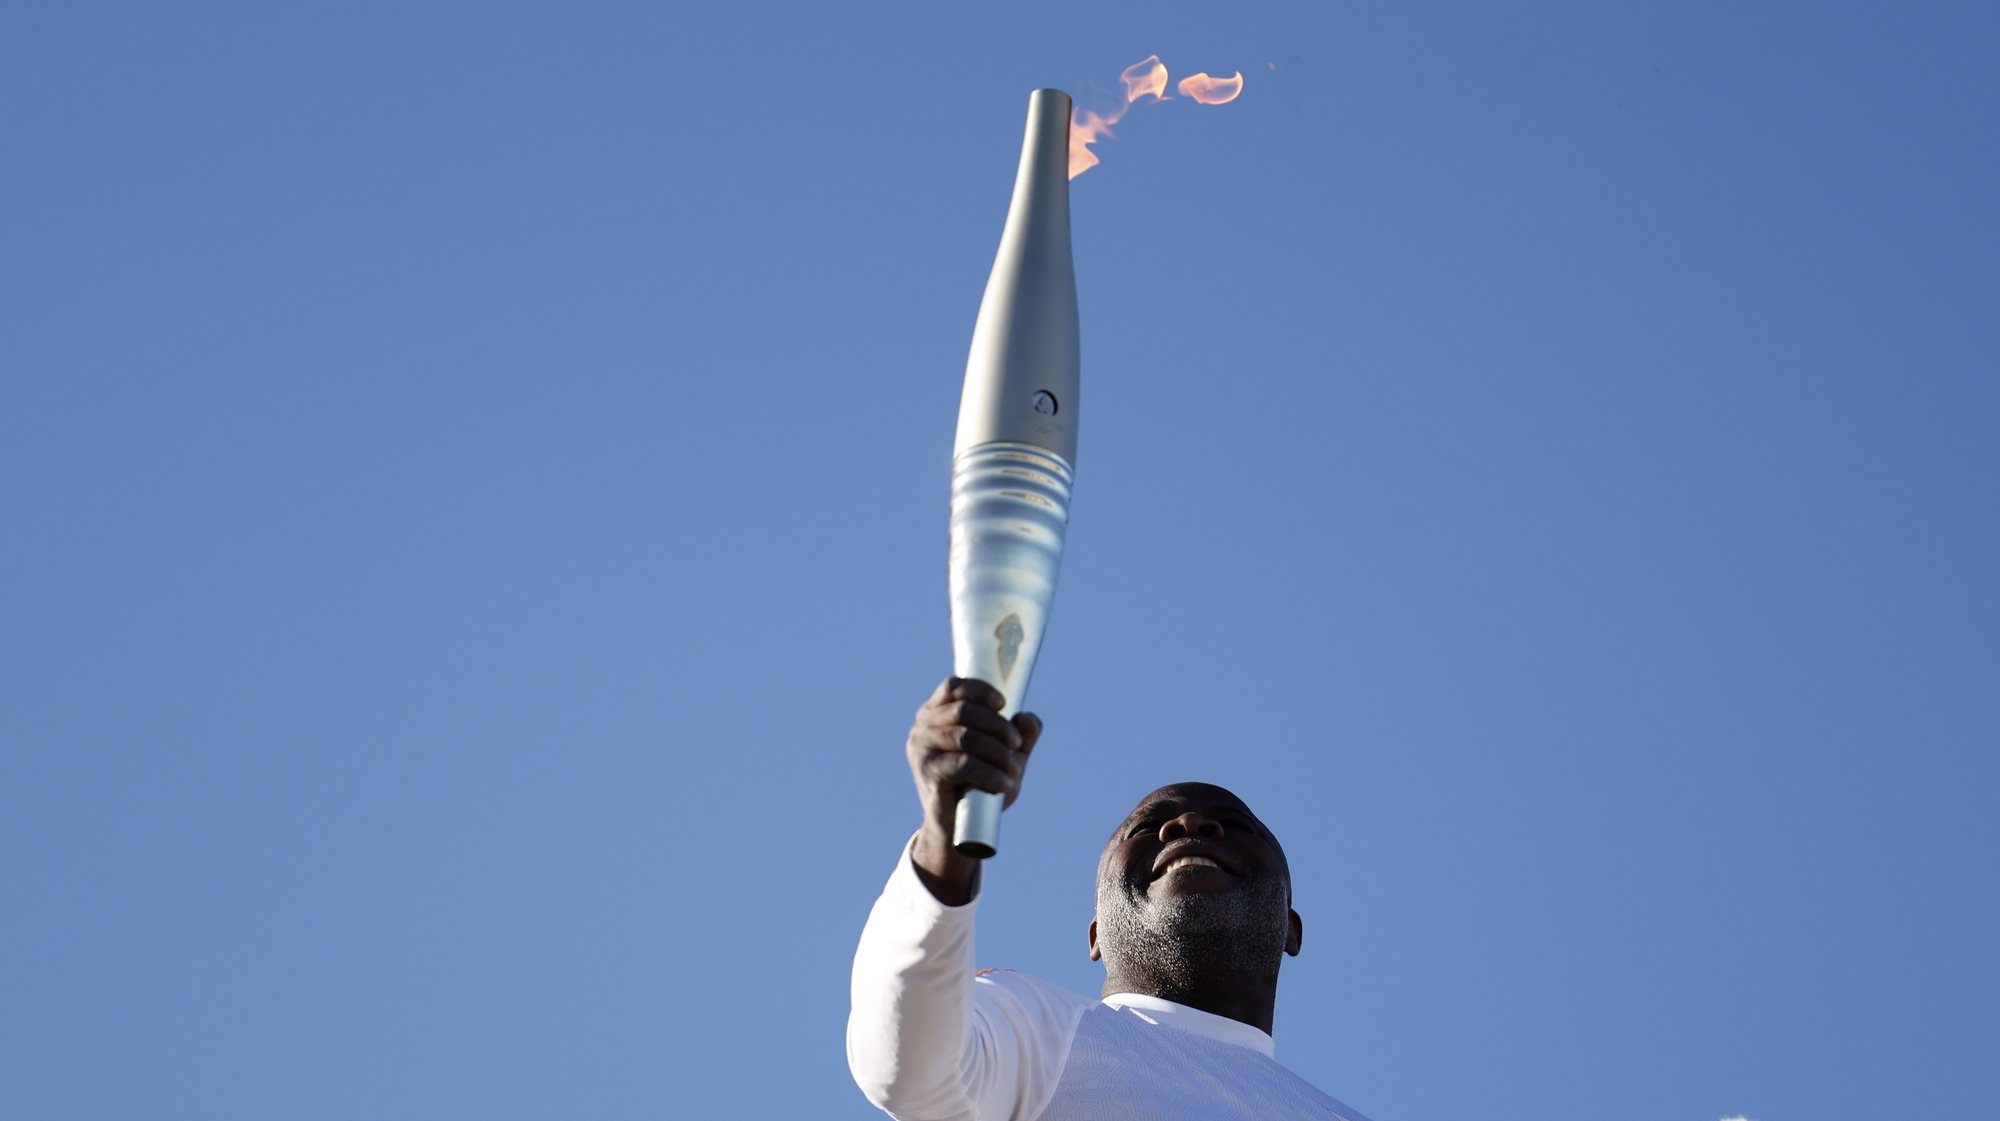 epa11328363 Former football player Basile Boli holds the Olympic Flame at Notre Dame De La Garde cathedral in Marseille, France, 09 May 2024, for the first leg of Olympic Torch relay. The Olympic Flame arrived in Marseille on 08 May following a 12-day journey from Piraeus, Greece, on board the Belem, a three-masted sailing ship built in 1896 and currently serving as a training ship under the French flag. The Paris 2024 Olympic Games will start on 26 July 2024.  EPA/GUILLAUME HORCAJUELO